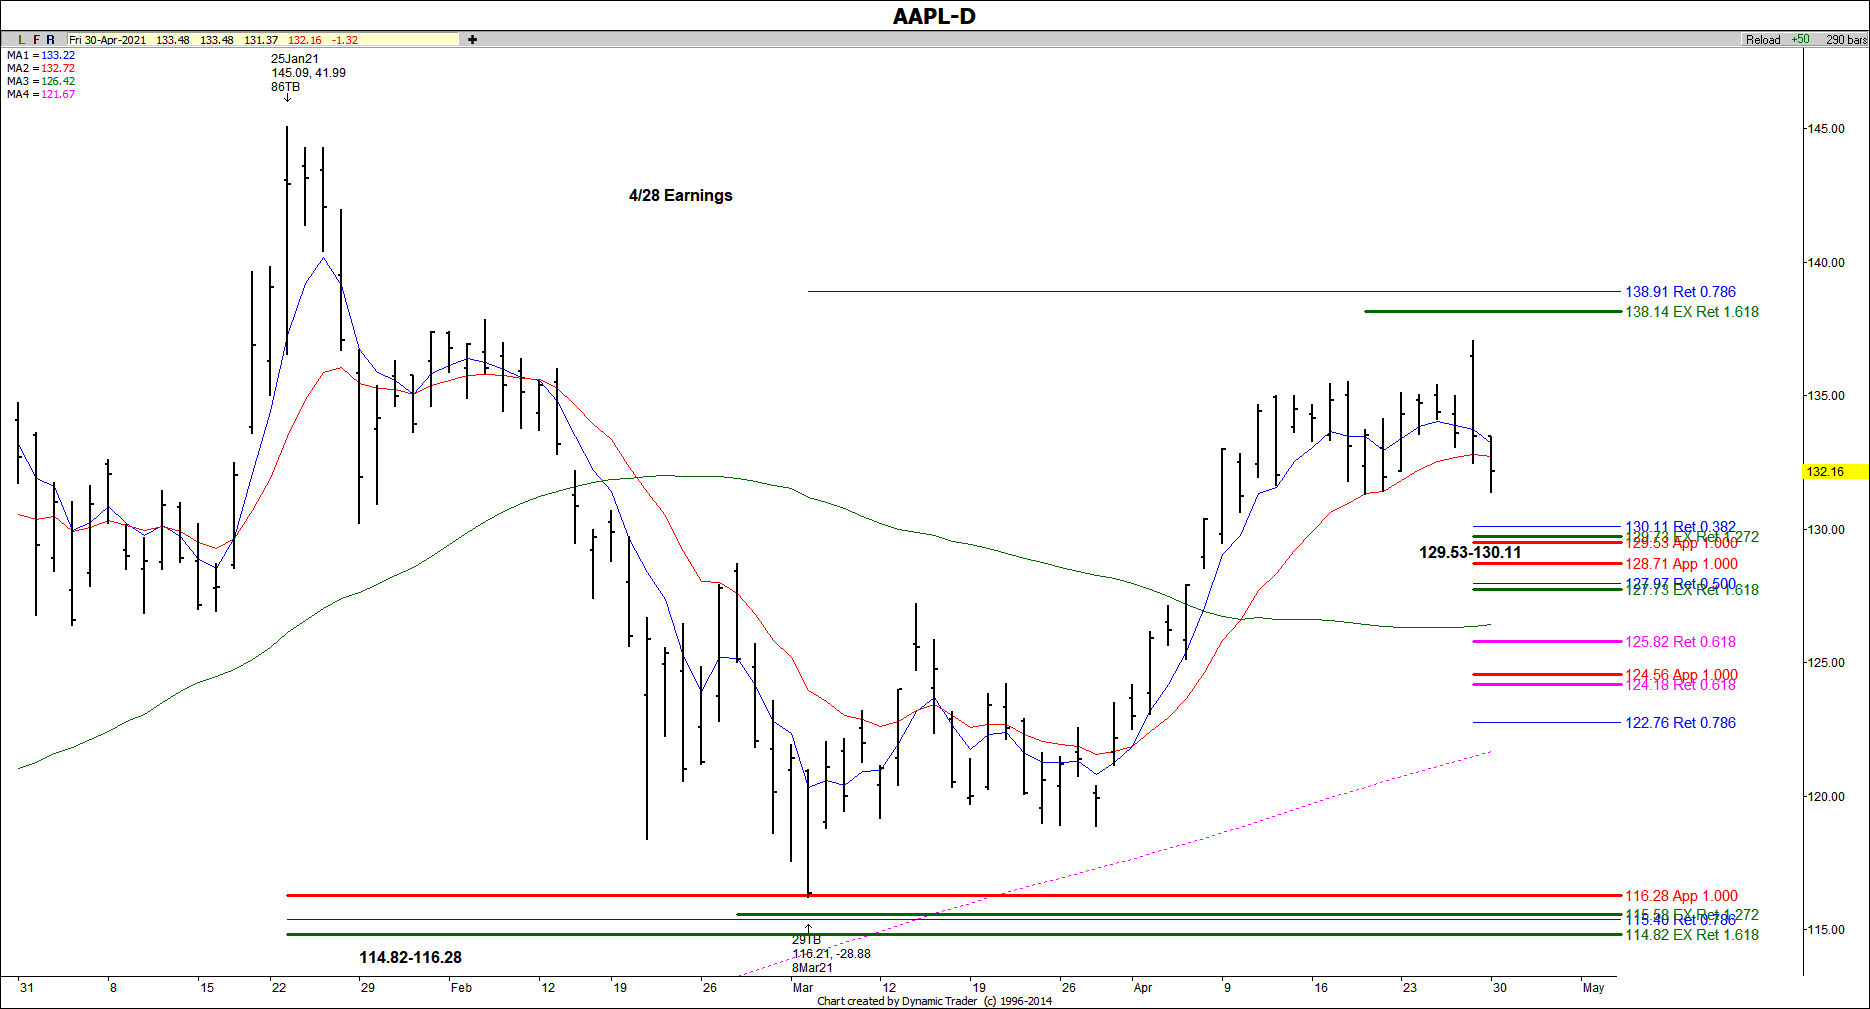 AAPL daily